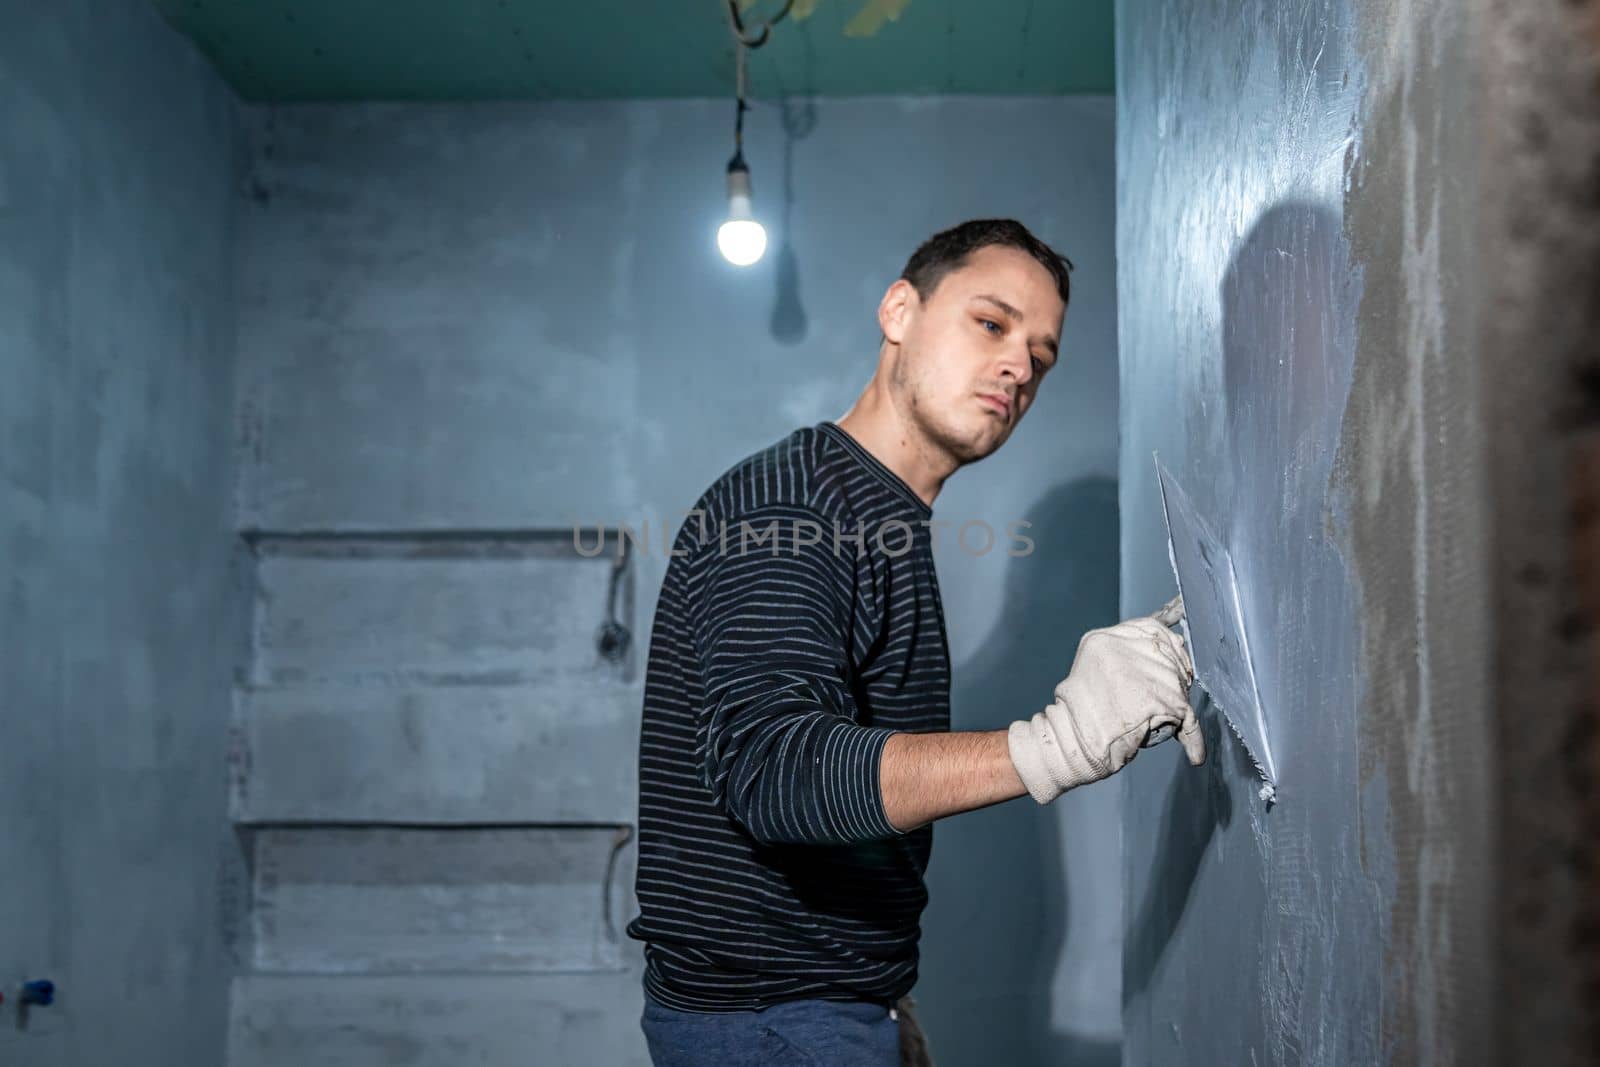 man applies insulation to a bathroom wall with trowel by Edophoto